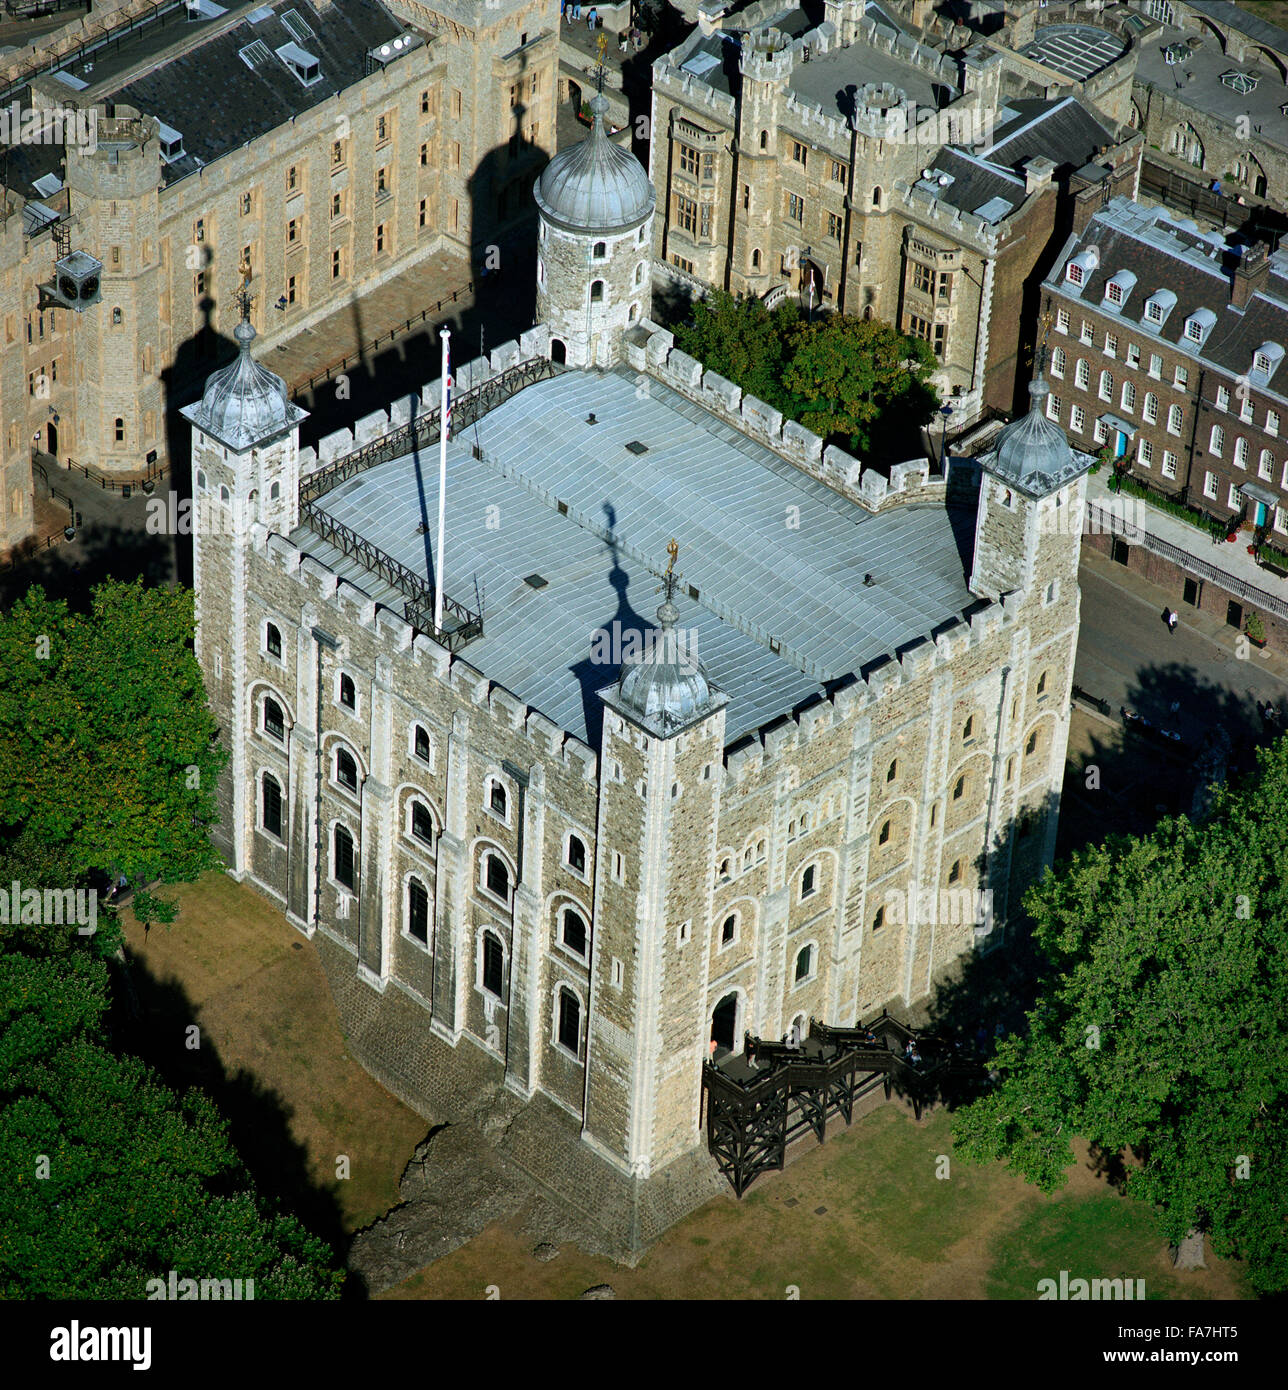 TOWER OF LONDON, London. Aerial view of the White Tower. Building work began c.1075. William the Conqueror put Gundulf, the new Bishop of Rochester, in charge of building work. Stock Photo